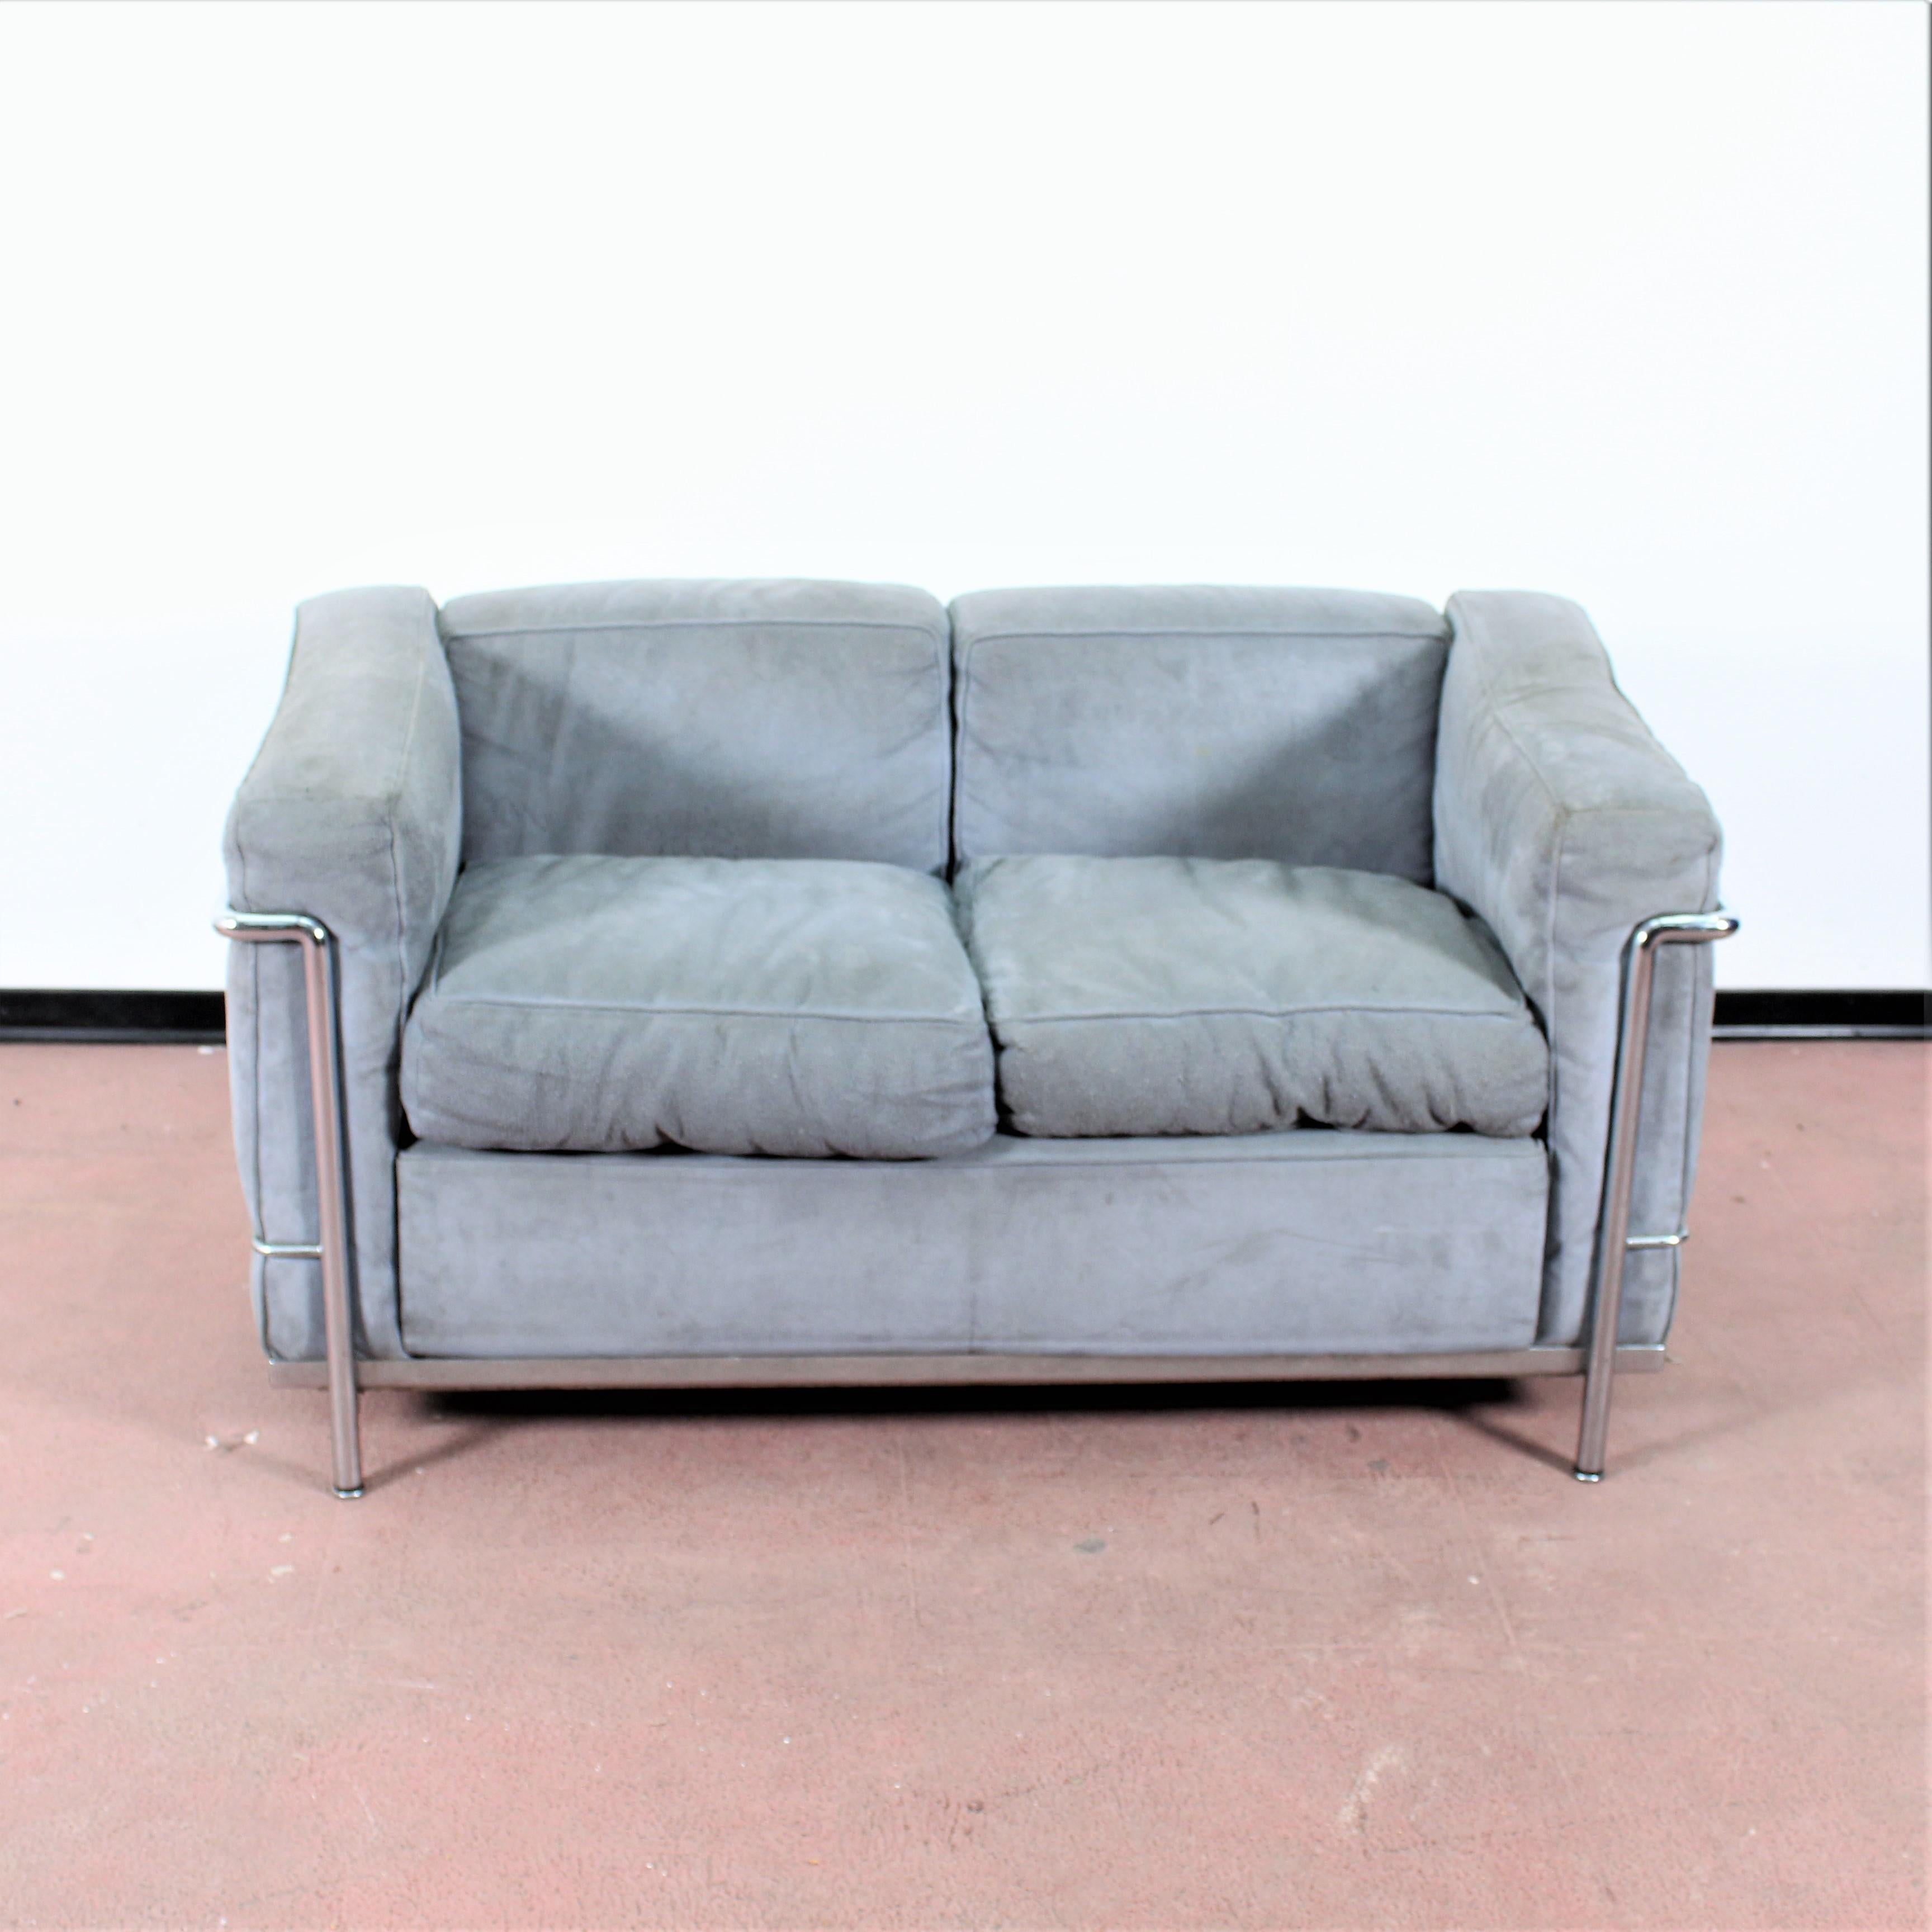 Two-seat gray chamois leather sofa, mod. LC2 designed by Le Corbusier and produced by Cassina in 1970s
It features a chromed tubular steel frame
Engraved brand visible on a chromed steel tube
Wear consistent with age and use.